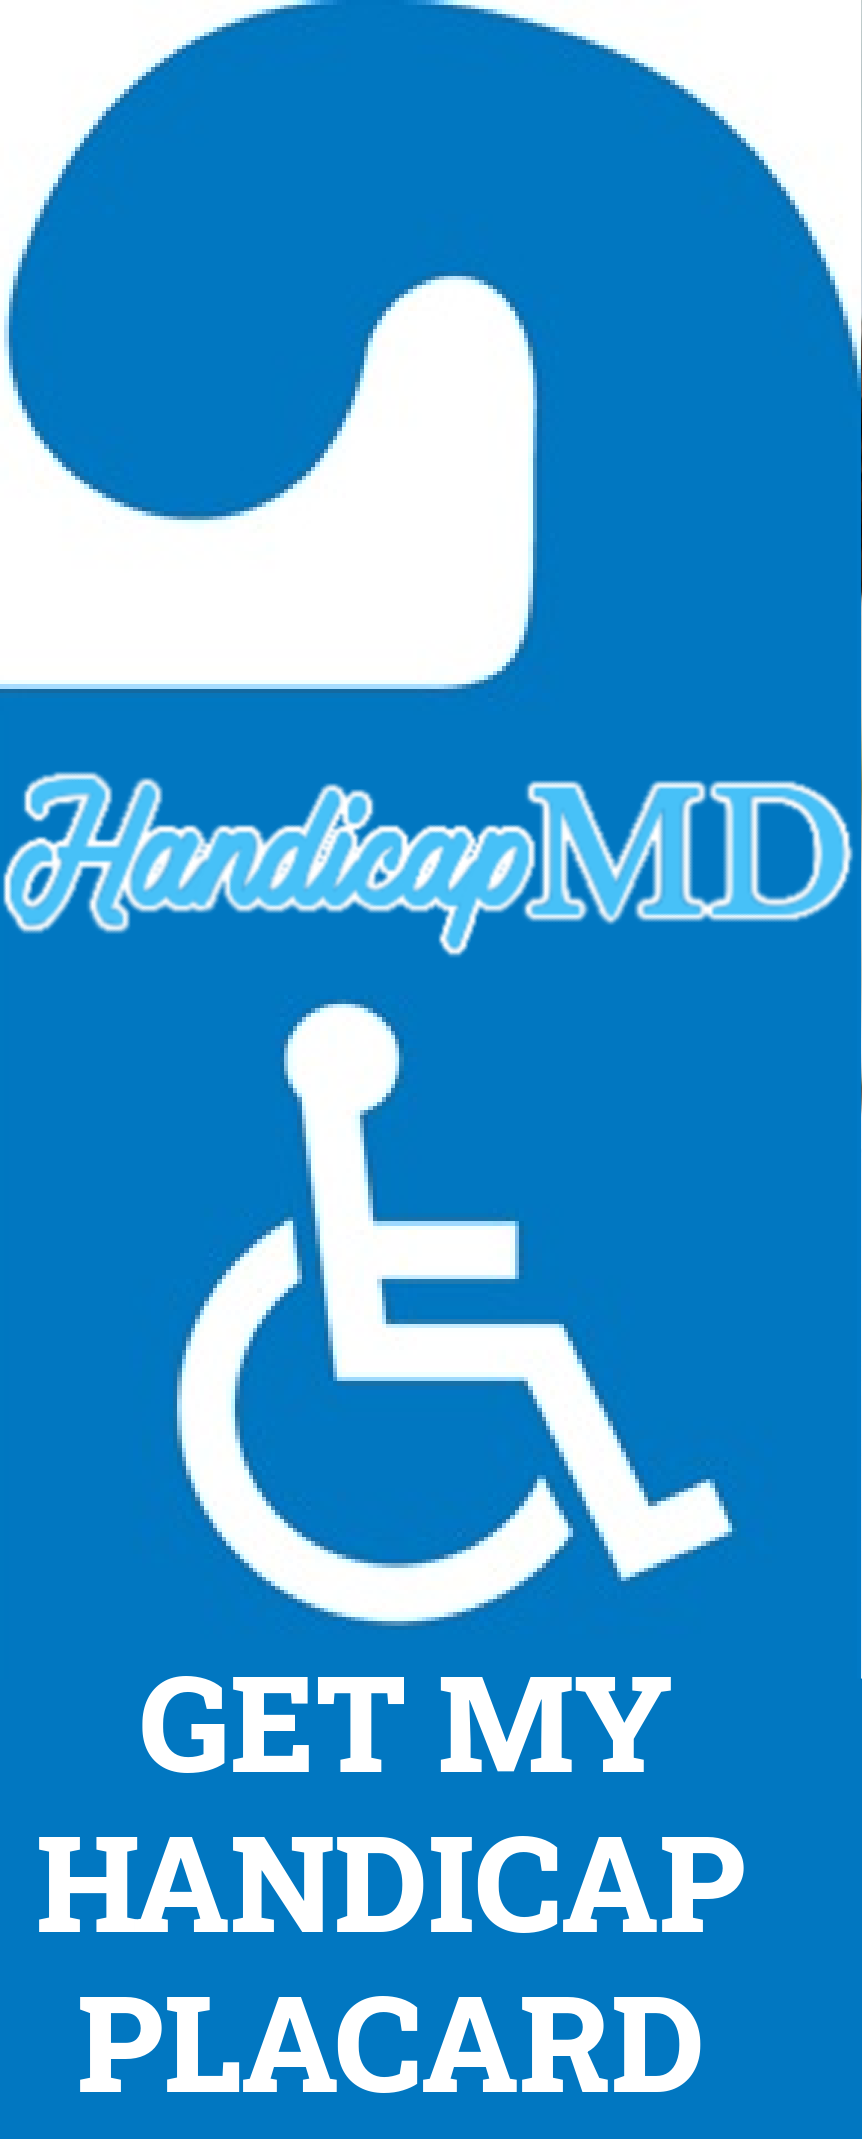 Tips for Displaying Your Handicap Placard Correctly in North Dakota